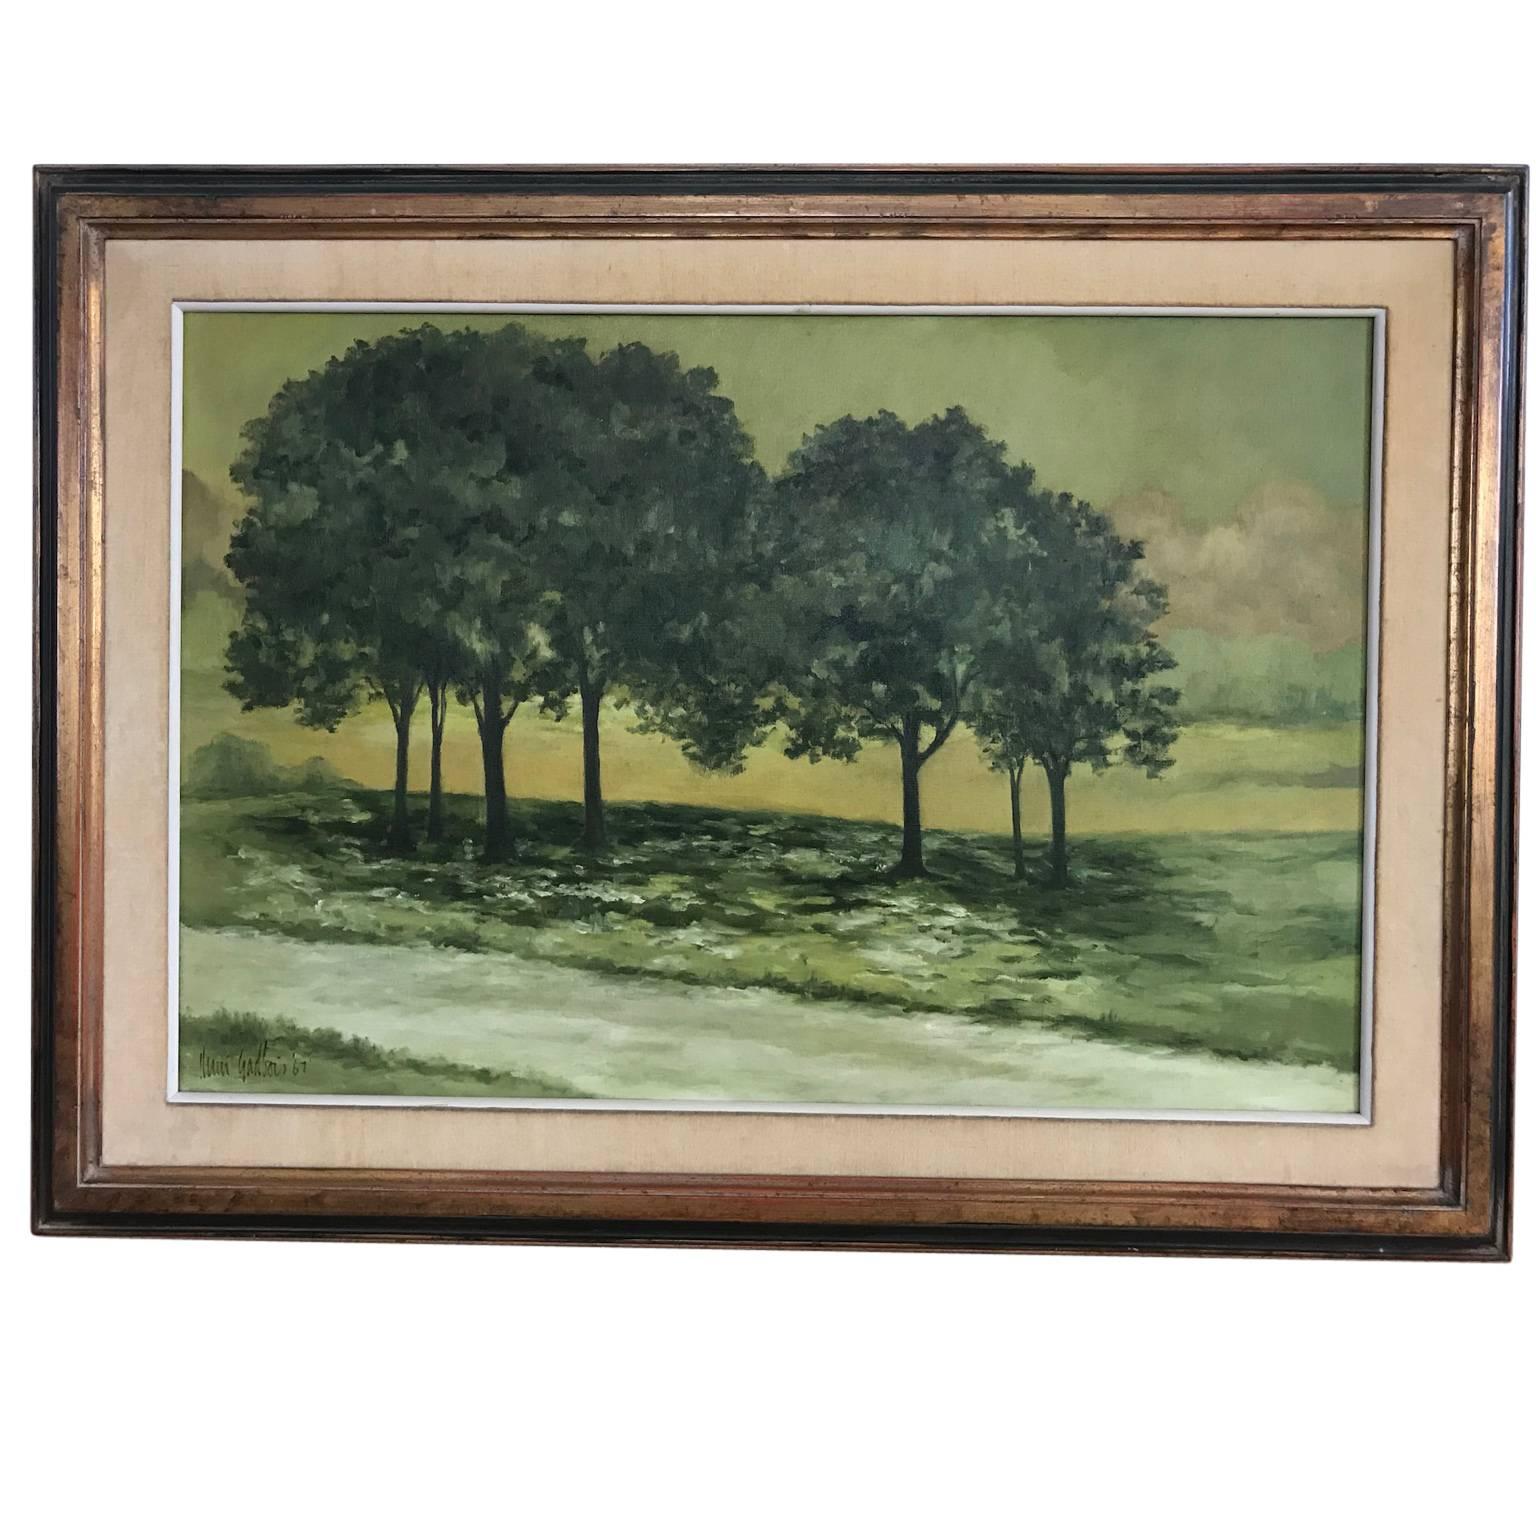 Texas Tree Landscape with Green Hues - Painting by Henri Gadbois